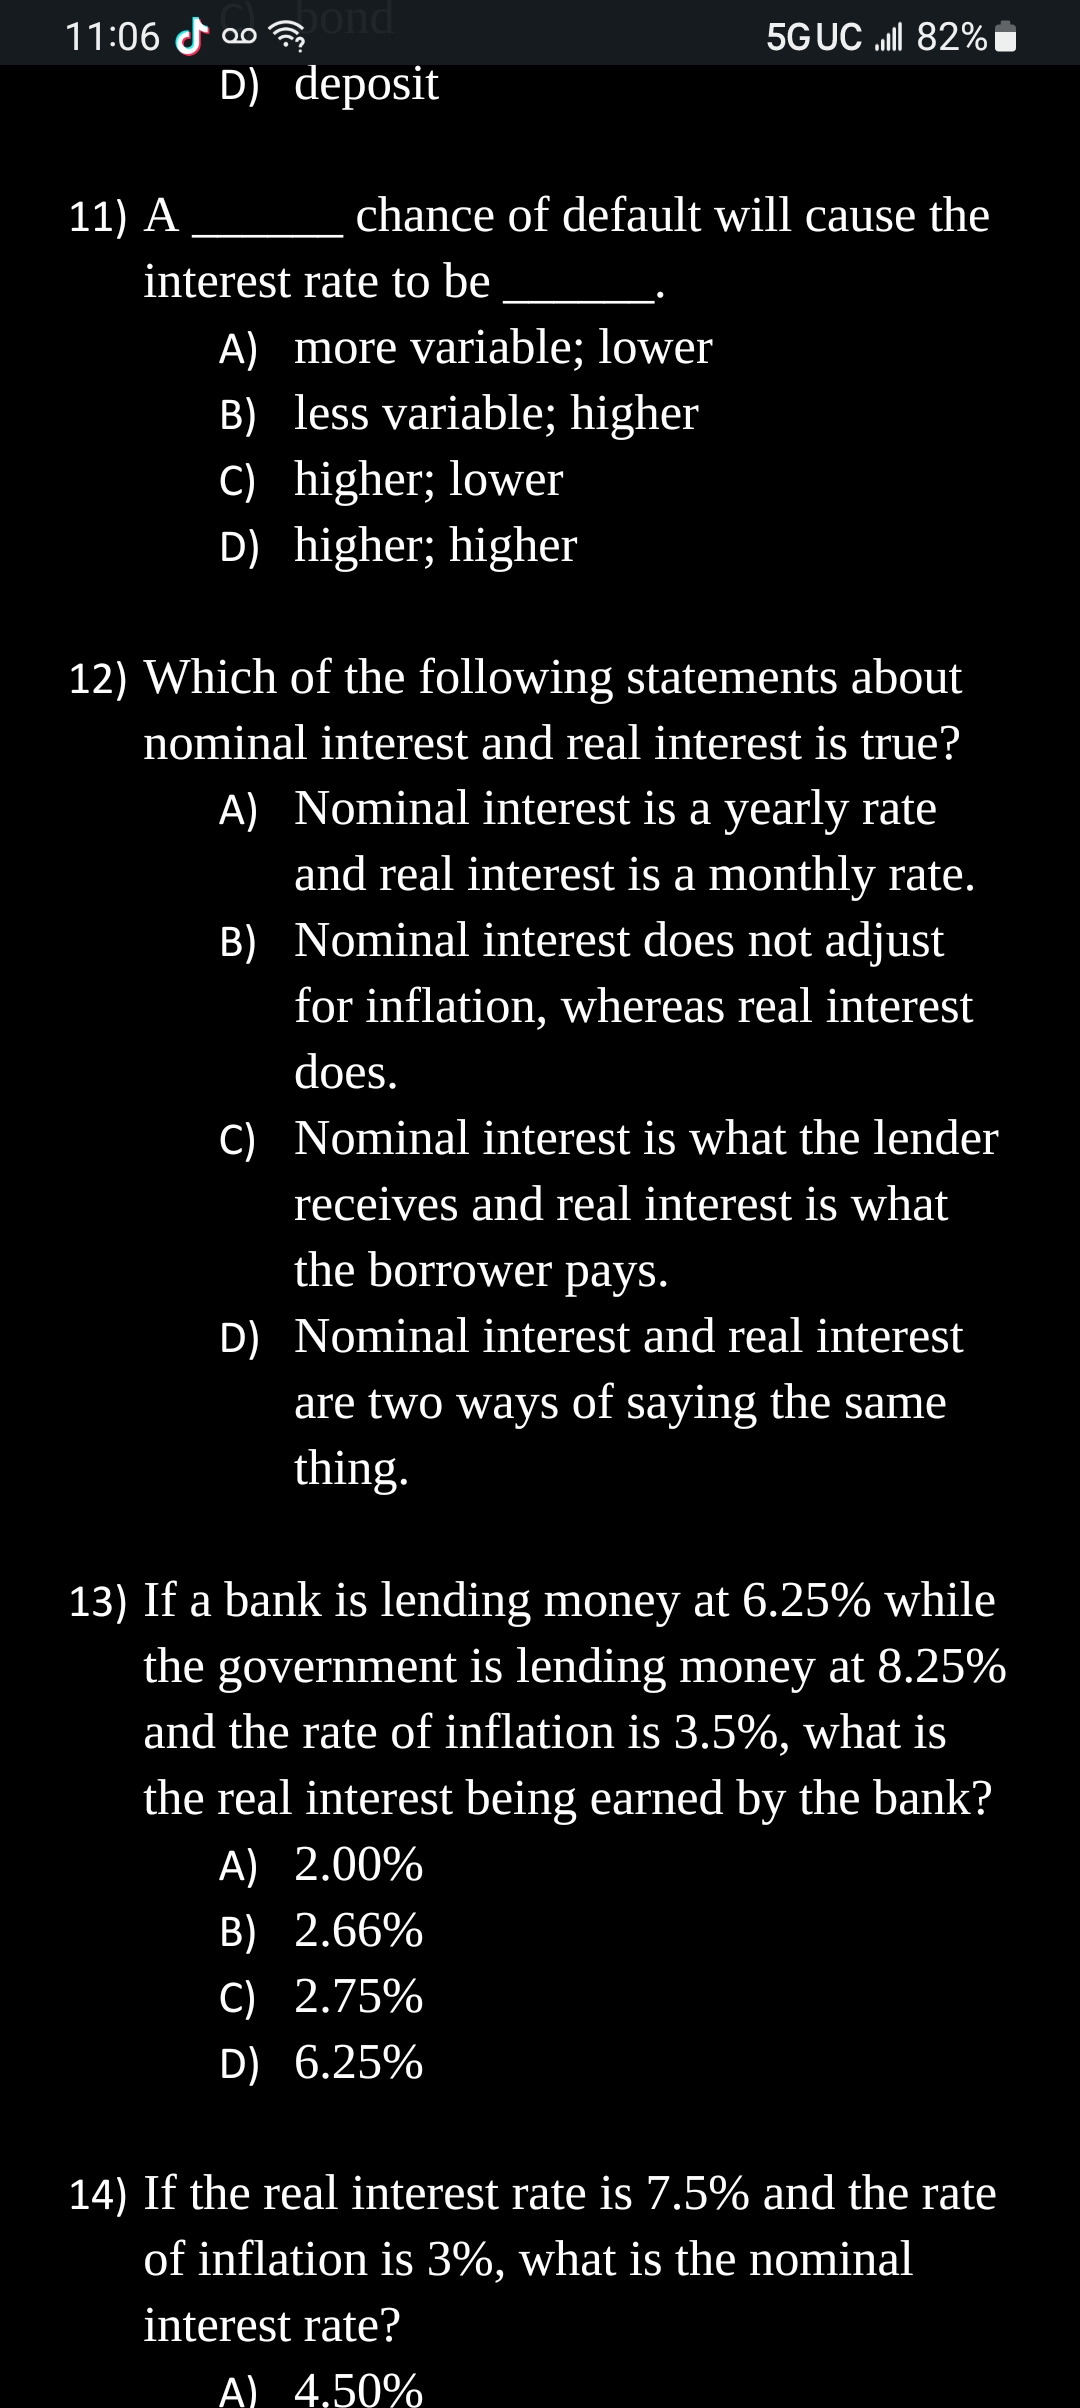 11:06
11) A
bond
D) deposit
interest rate to be
chance of default will cause the
A) more variable; lower
B) less variable; higher
C) higher; lower
D) higher; higher
5G UC ll 82%
B)
12) Which of the following statements about
nominal interest and real interest is true?
A) Nominal interest is a yearly rate
and real interest is a monthly rate.
Nominal interest does not adjust
for inflation, whereas real interest
does.
C) Nominal interest is what the lender
receives and real interest is what
the borrower pays.
D) Nominal interest and real interest
are two ways of saying the same
thing.
13) If a bank is lending money at 6.25% while
the government is lending money at 8.25%
and the rate of inflation is 3.5%, what is
the real interest being earned by the bank?
A) 2.00%
B) 2.66%
C) 2.75%
D) 6.25%
14) If the real interest rate is 7.5% and the rate
of inflation is 3%, what is the nominal
interest rate?
A) 4,50%